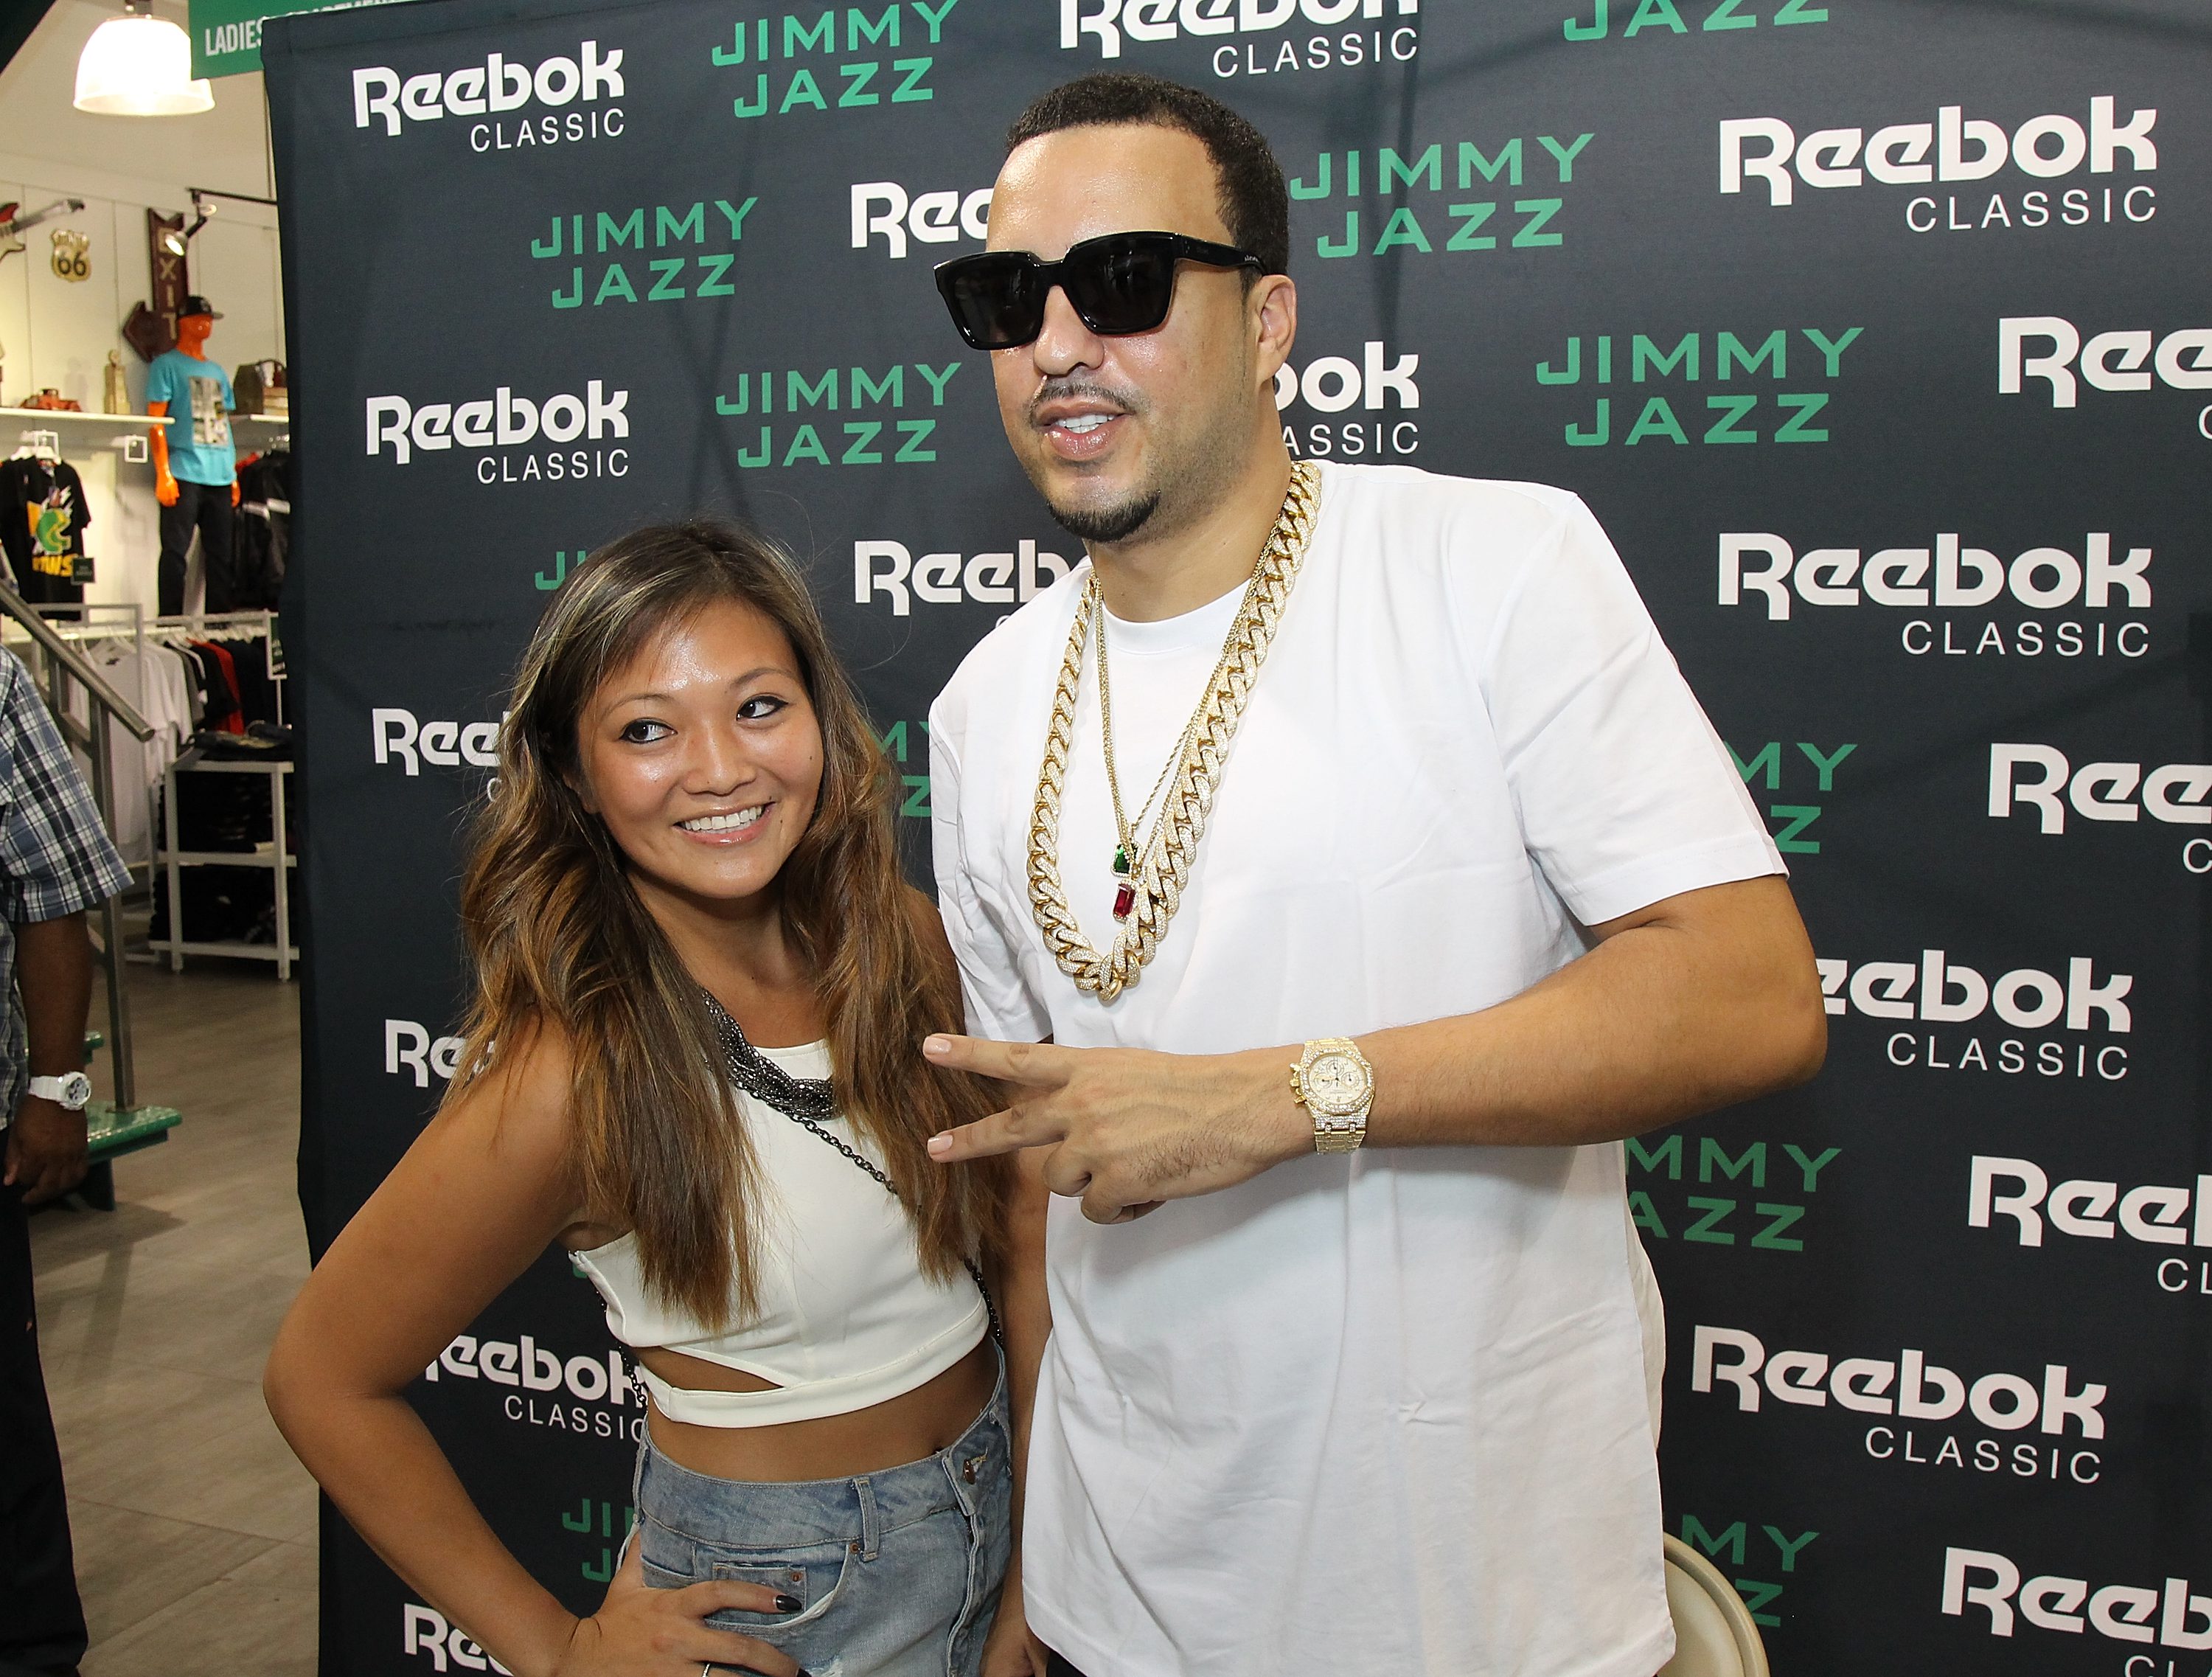 NEW YORK, NY - AUGUST 30:  French Montana poses with a fan during the Launch of the Ventilator ST at Jimmy Jazz in Harlem on August 30, 2015 in New York City.  (Photo by Bennett Raglin/Getty Images for Reebok)